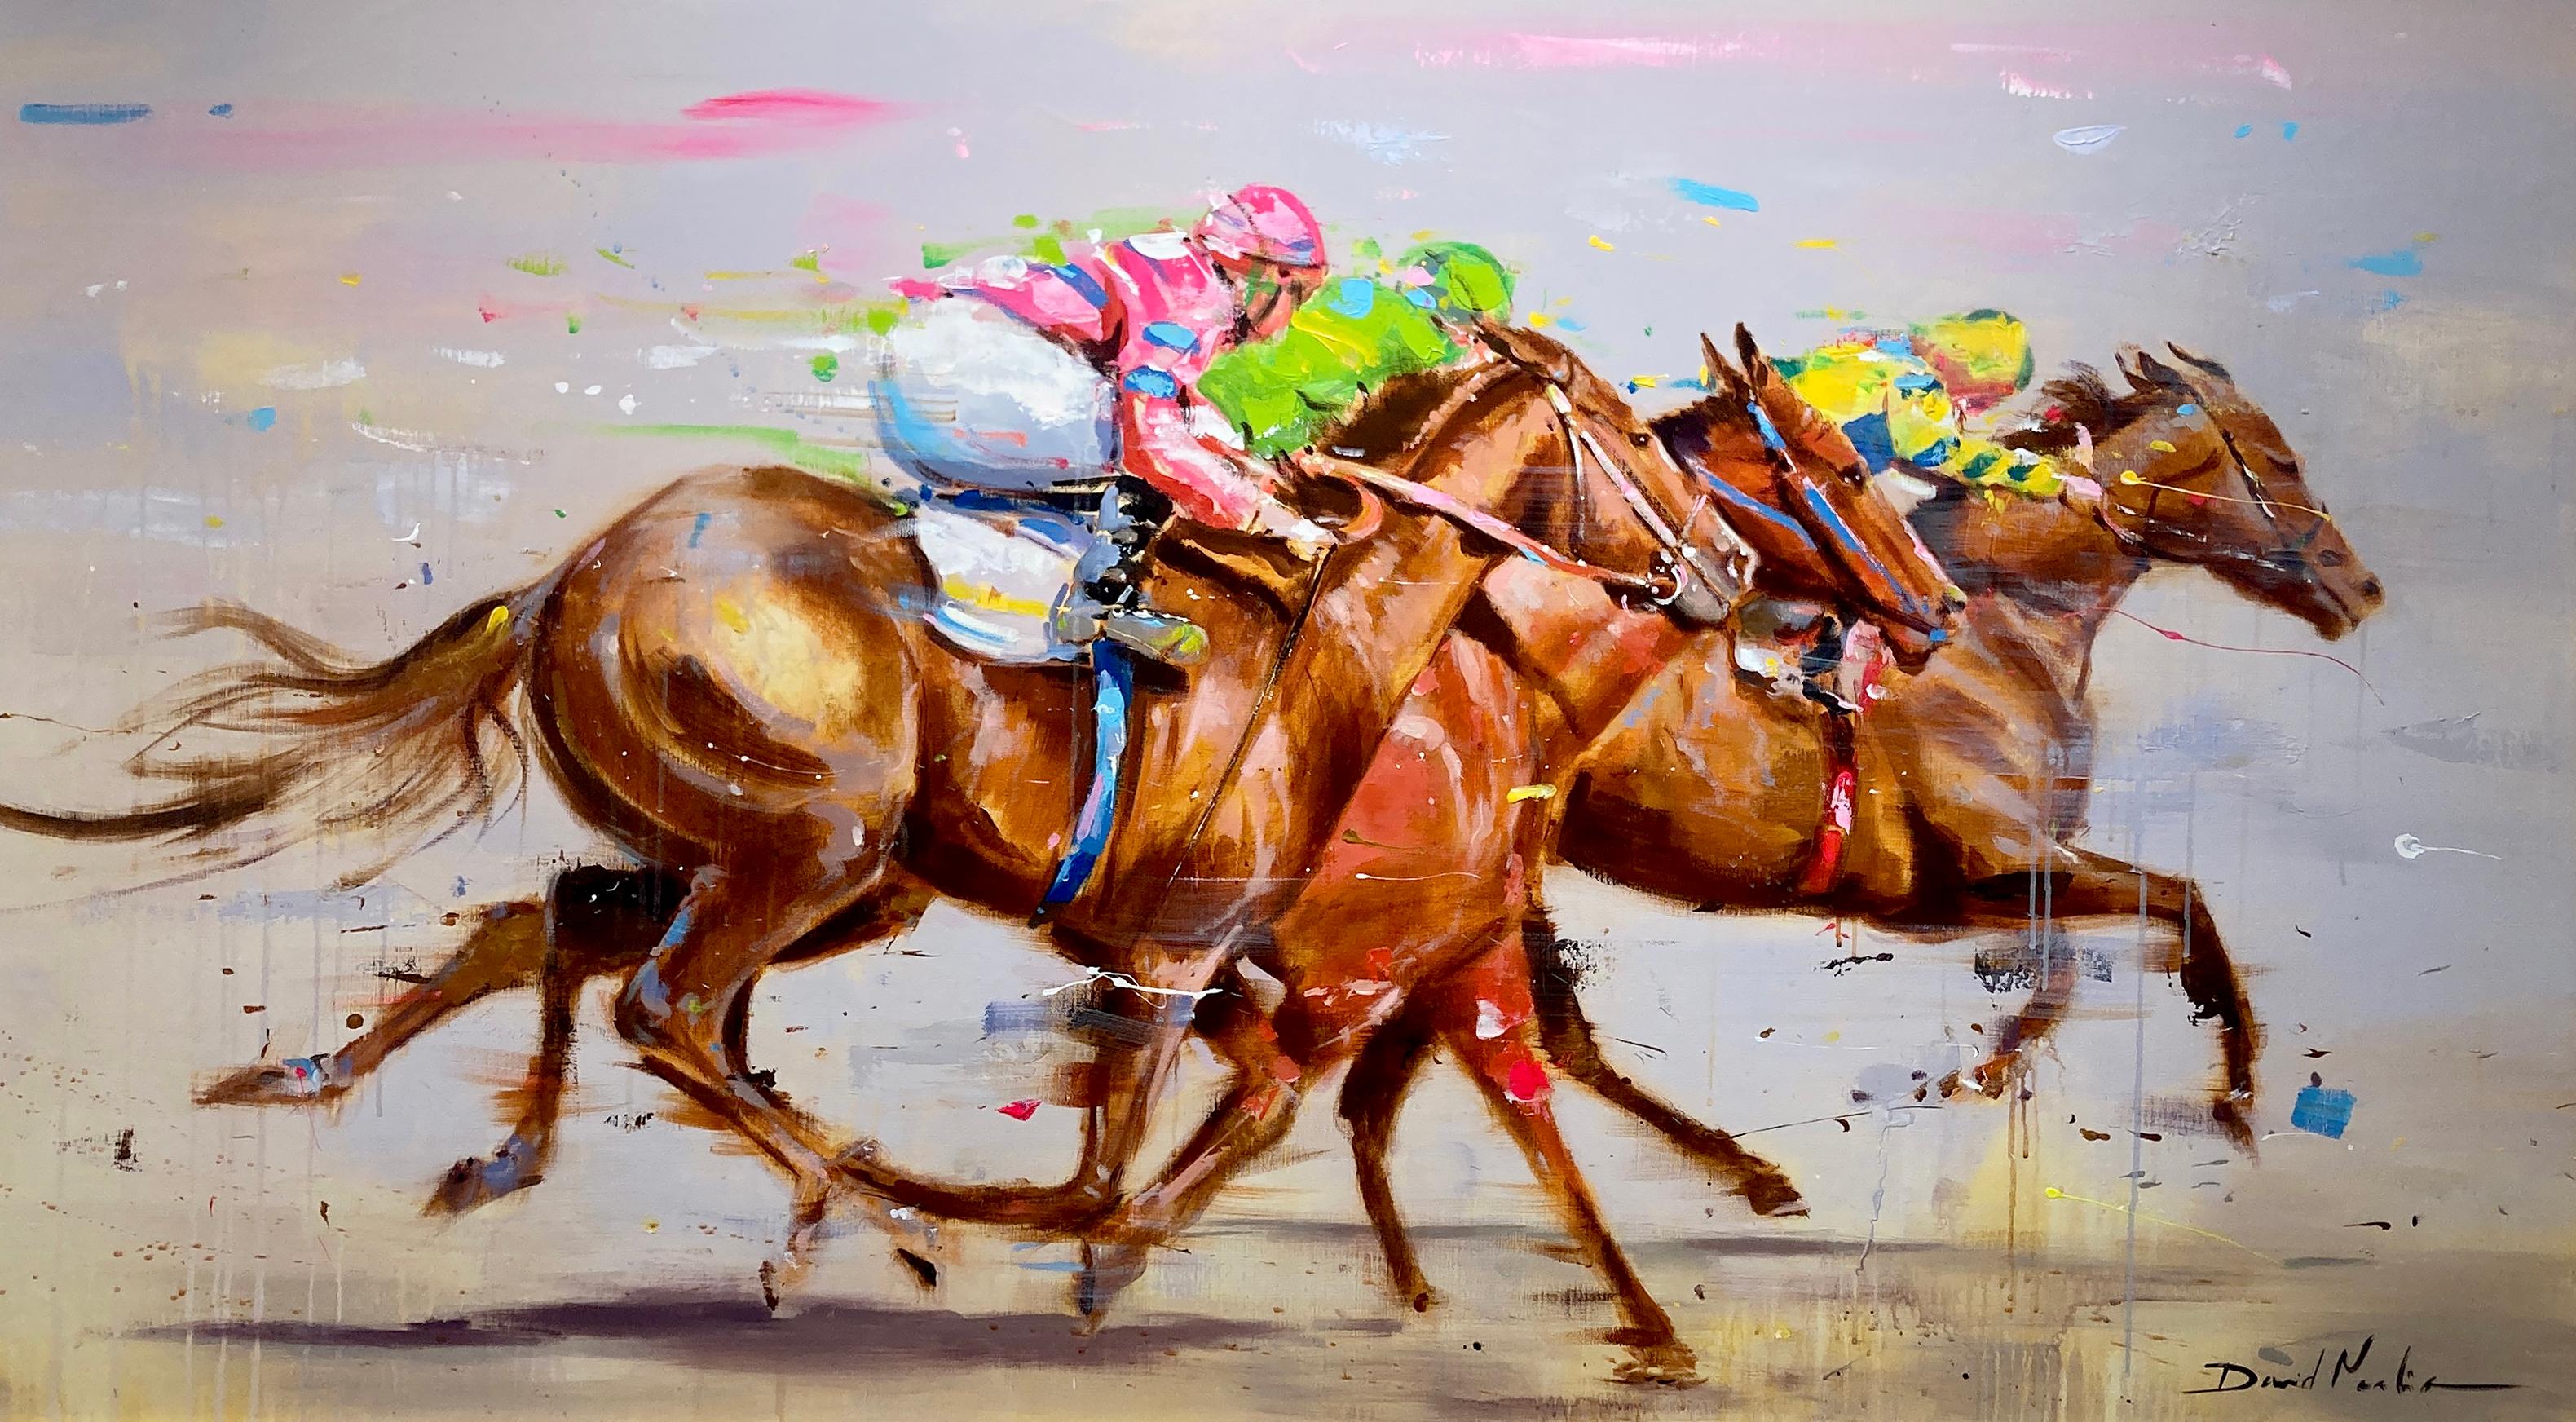 David Noalia, "Sound of Thunder", 36x63 Colorful Equine Horse Race Oil Painting